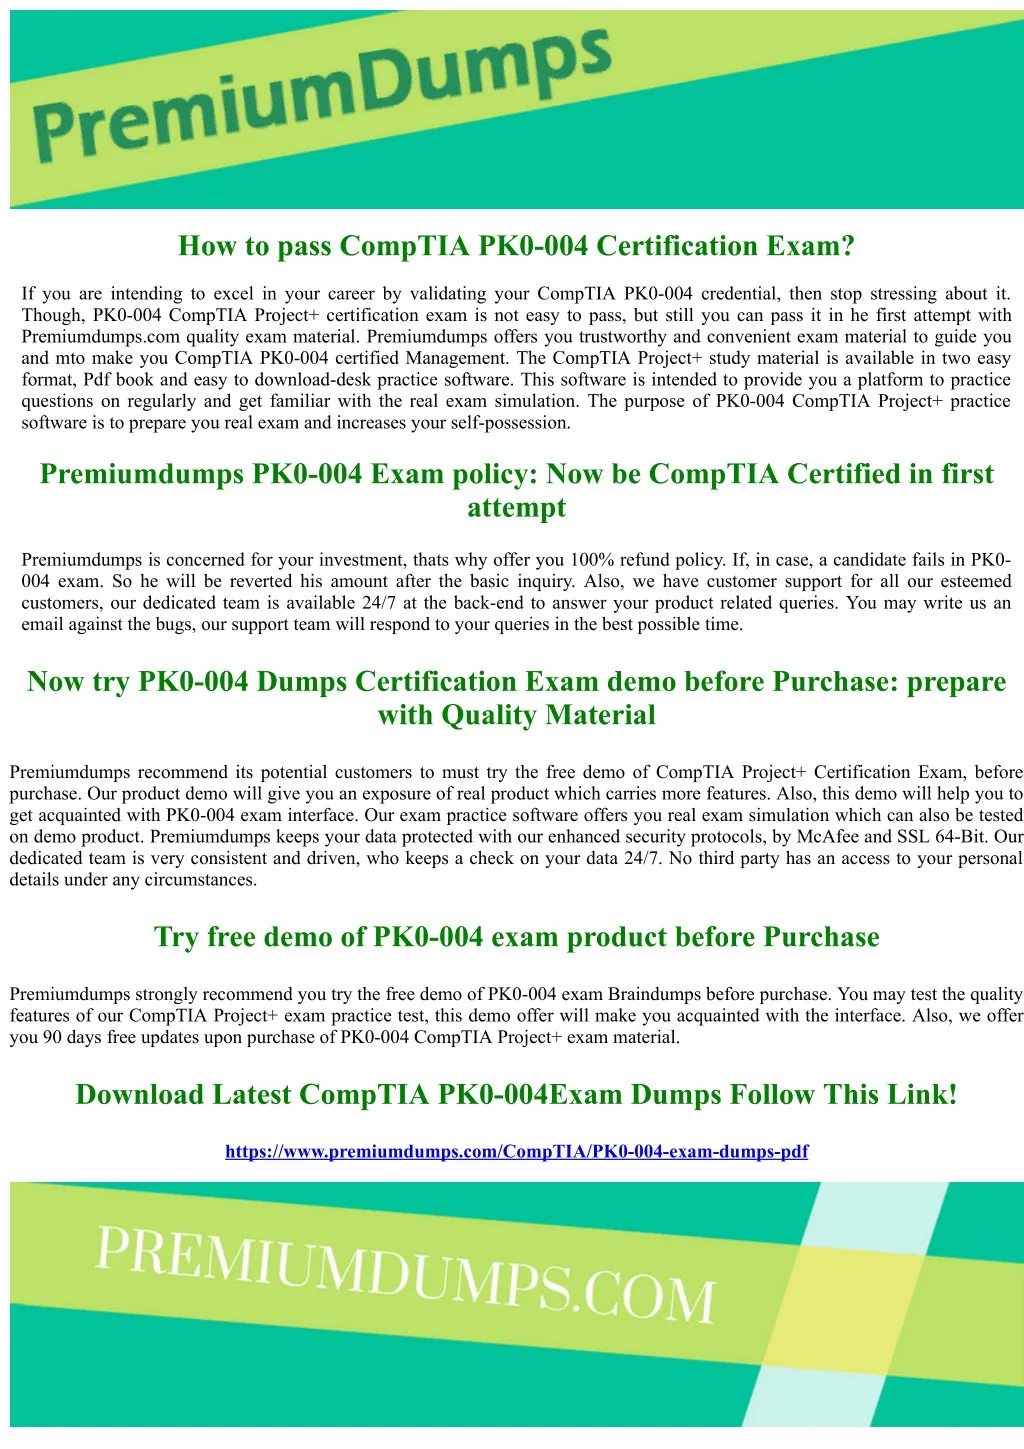 how to pass comptia pk0 004 certification exam